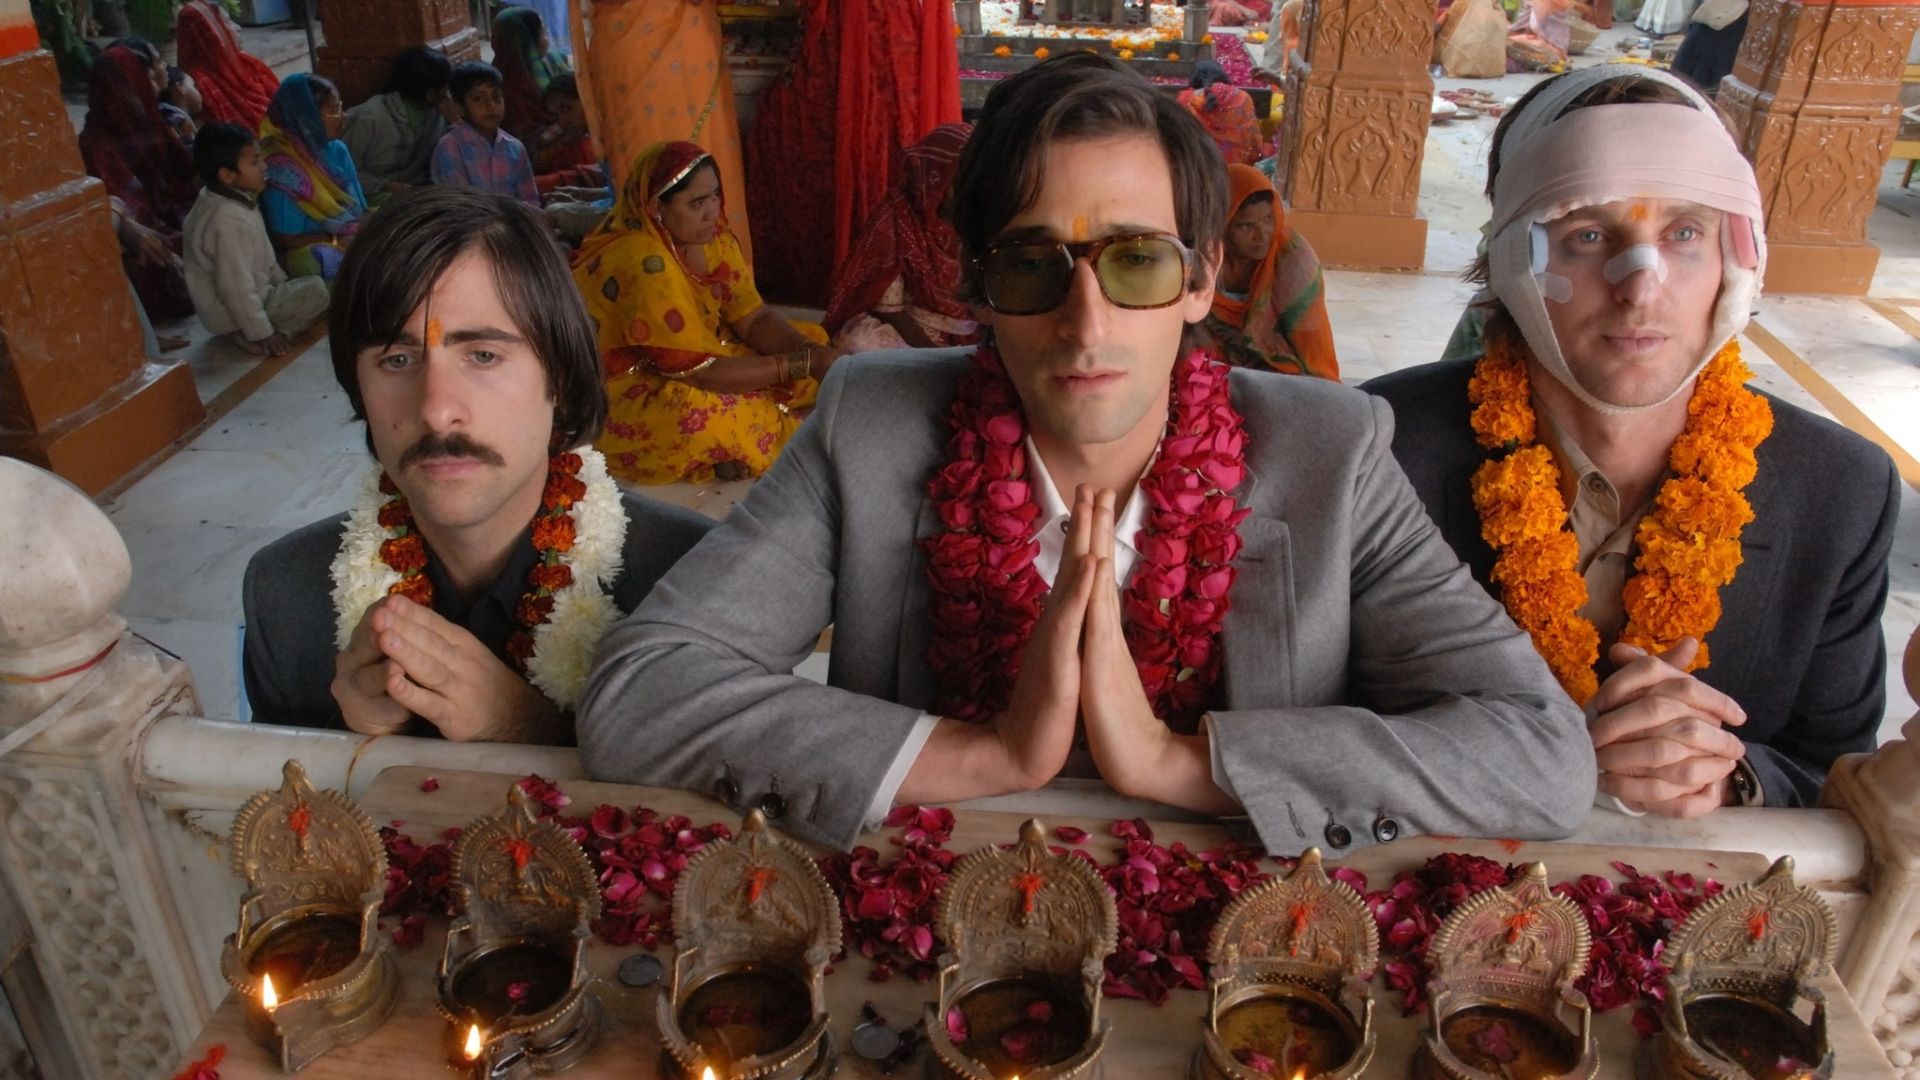 <p>                     Not starting off with any real controversy here, as <em><strong>The Darjeeling Limited</strong></em> is widely regarded as Wes Anderson’s weakest outing. Owen Wilson, Adrien Brody and Jason Schwartzman star as three brothers who attempt to reconnect a year after their father’s funeral as they travel across India by train. Anderson’s oddball characters generally work best when they are firmly in their own world, be it fictional or exaggerated, but in <em><strong>The Darjeeling Limited</strong></em> the main trio are entirely out of place as they interact with the people and culture of India. In a filmography that features mostly hits, <em><strong>The Darjeeling Limited</strong></em> sticks out as a rare misfire from Anderson.                    </p>